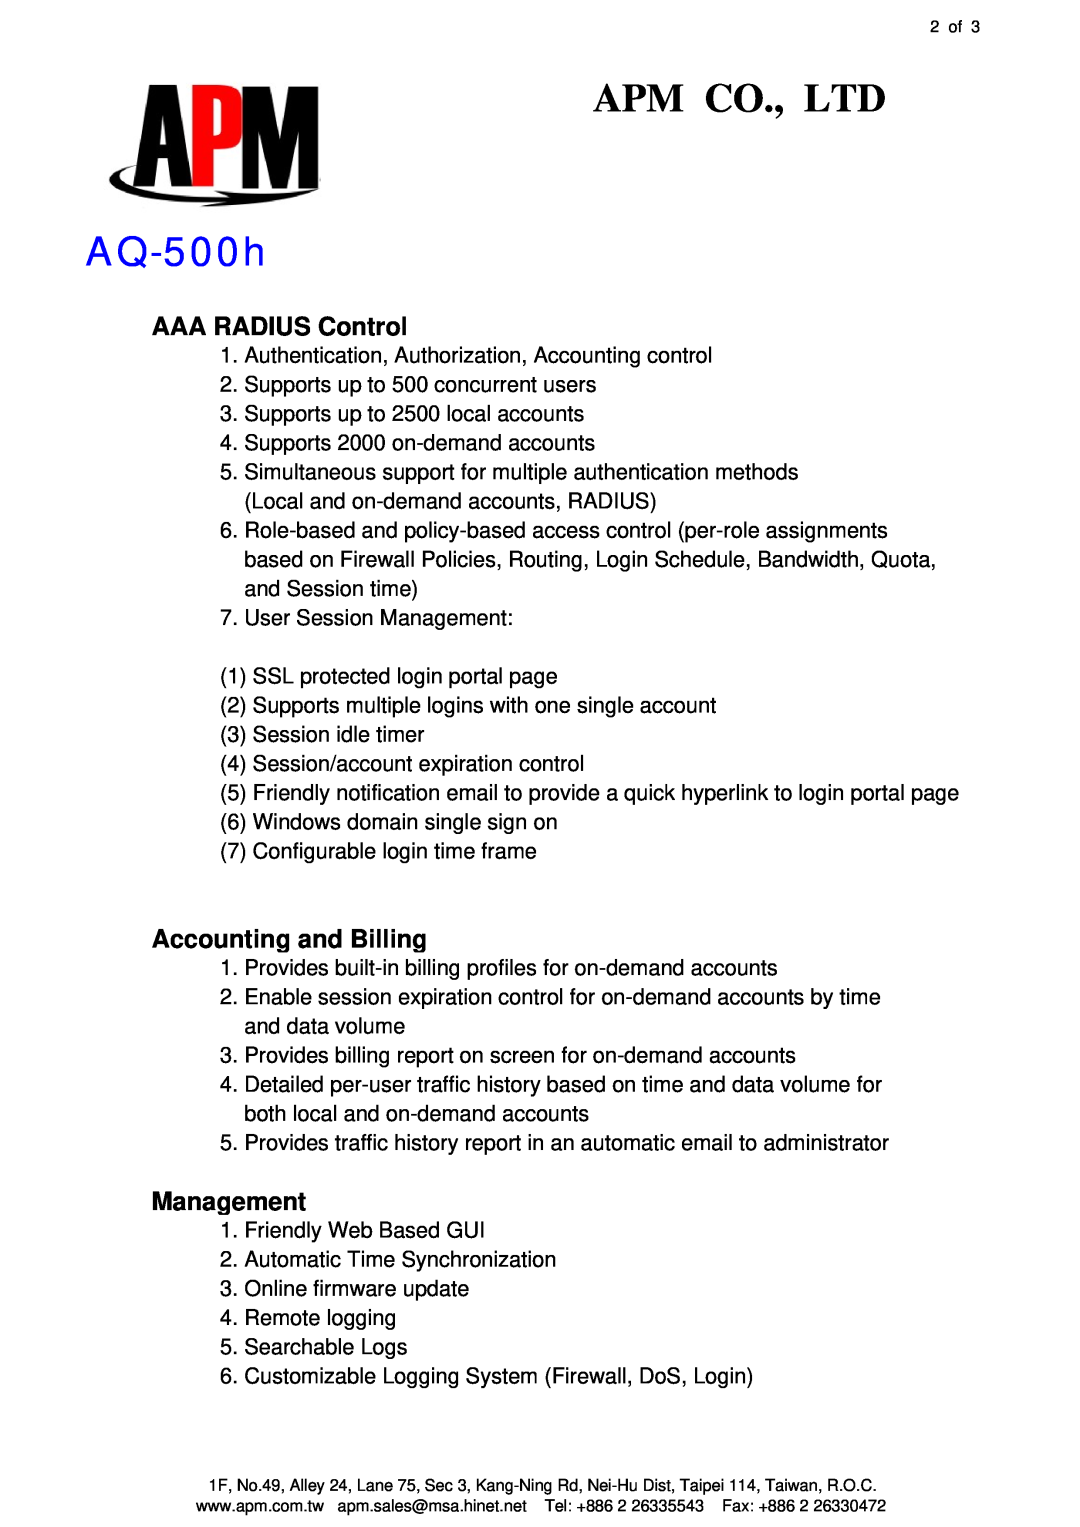 APM AQ-500h specifications AAA RADIUS Control, Accounting and Billing, Management 